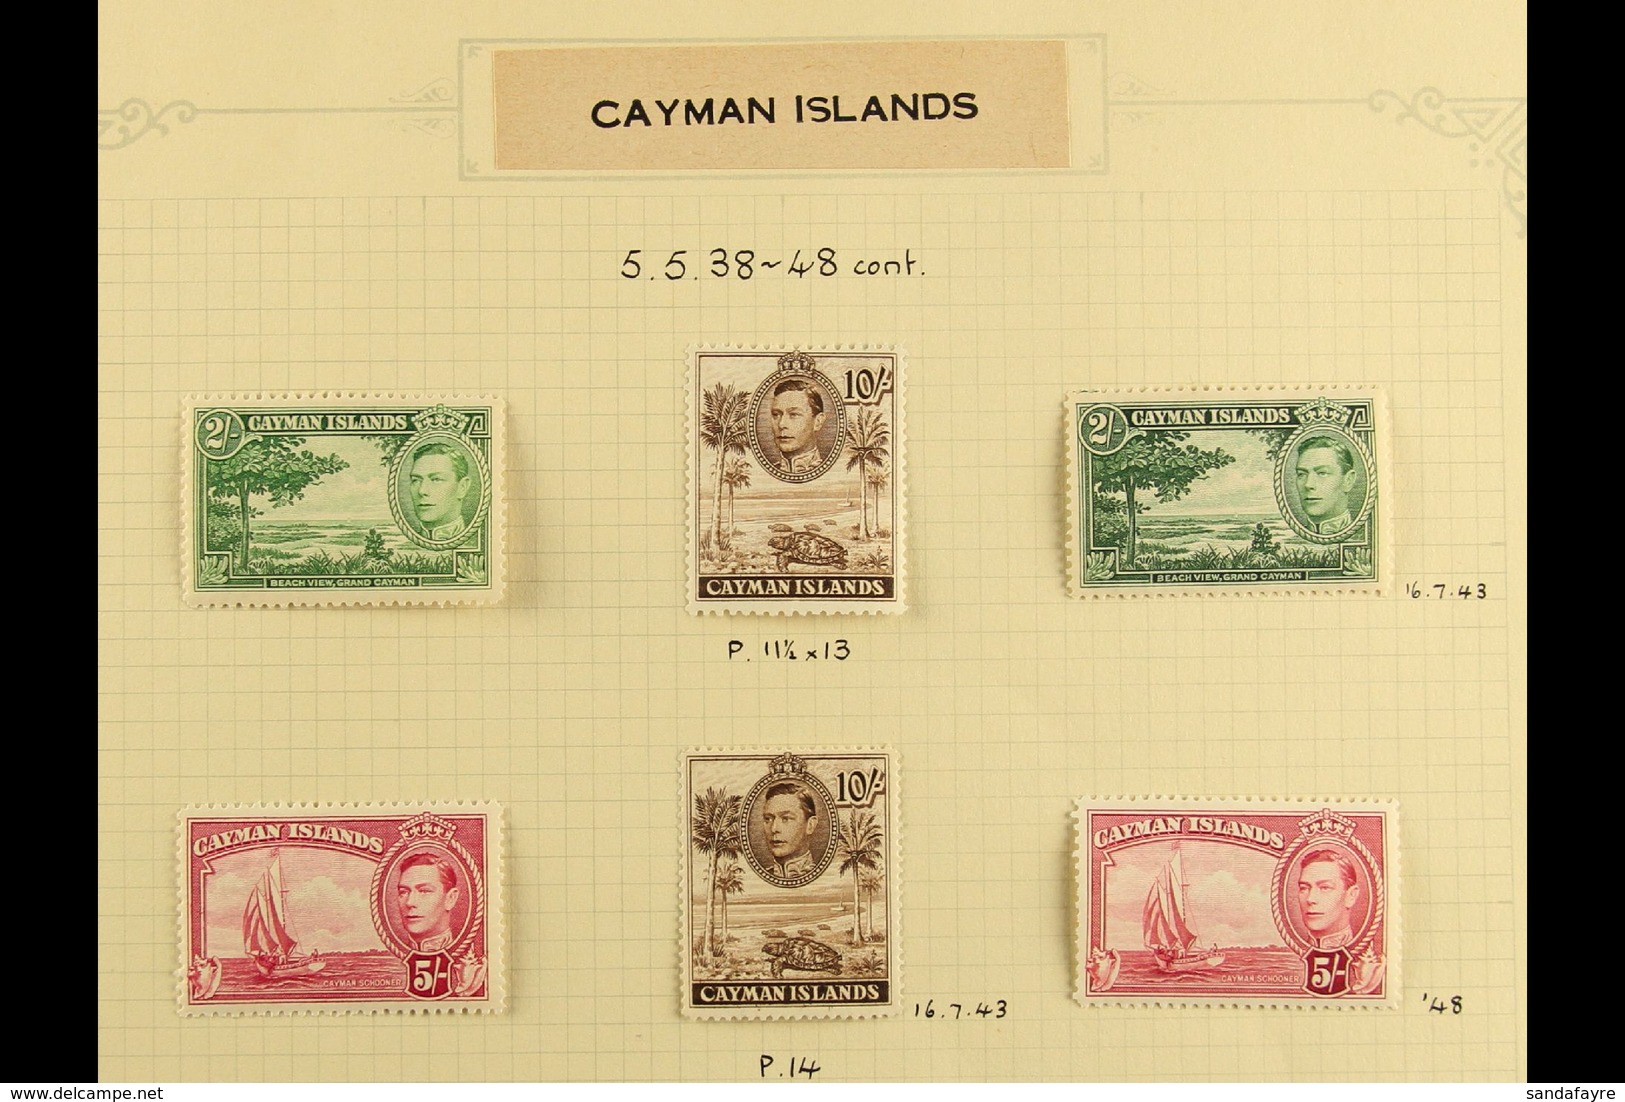 1937-79 VERY FINE MINT COLLECTION A Lovely Complete Collection For The Period Nicely Written Up On Album Pages, Includes - Cayman Islands